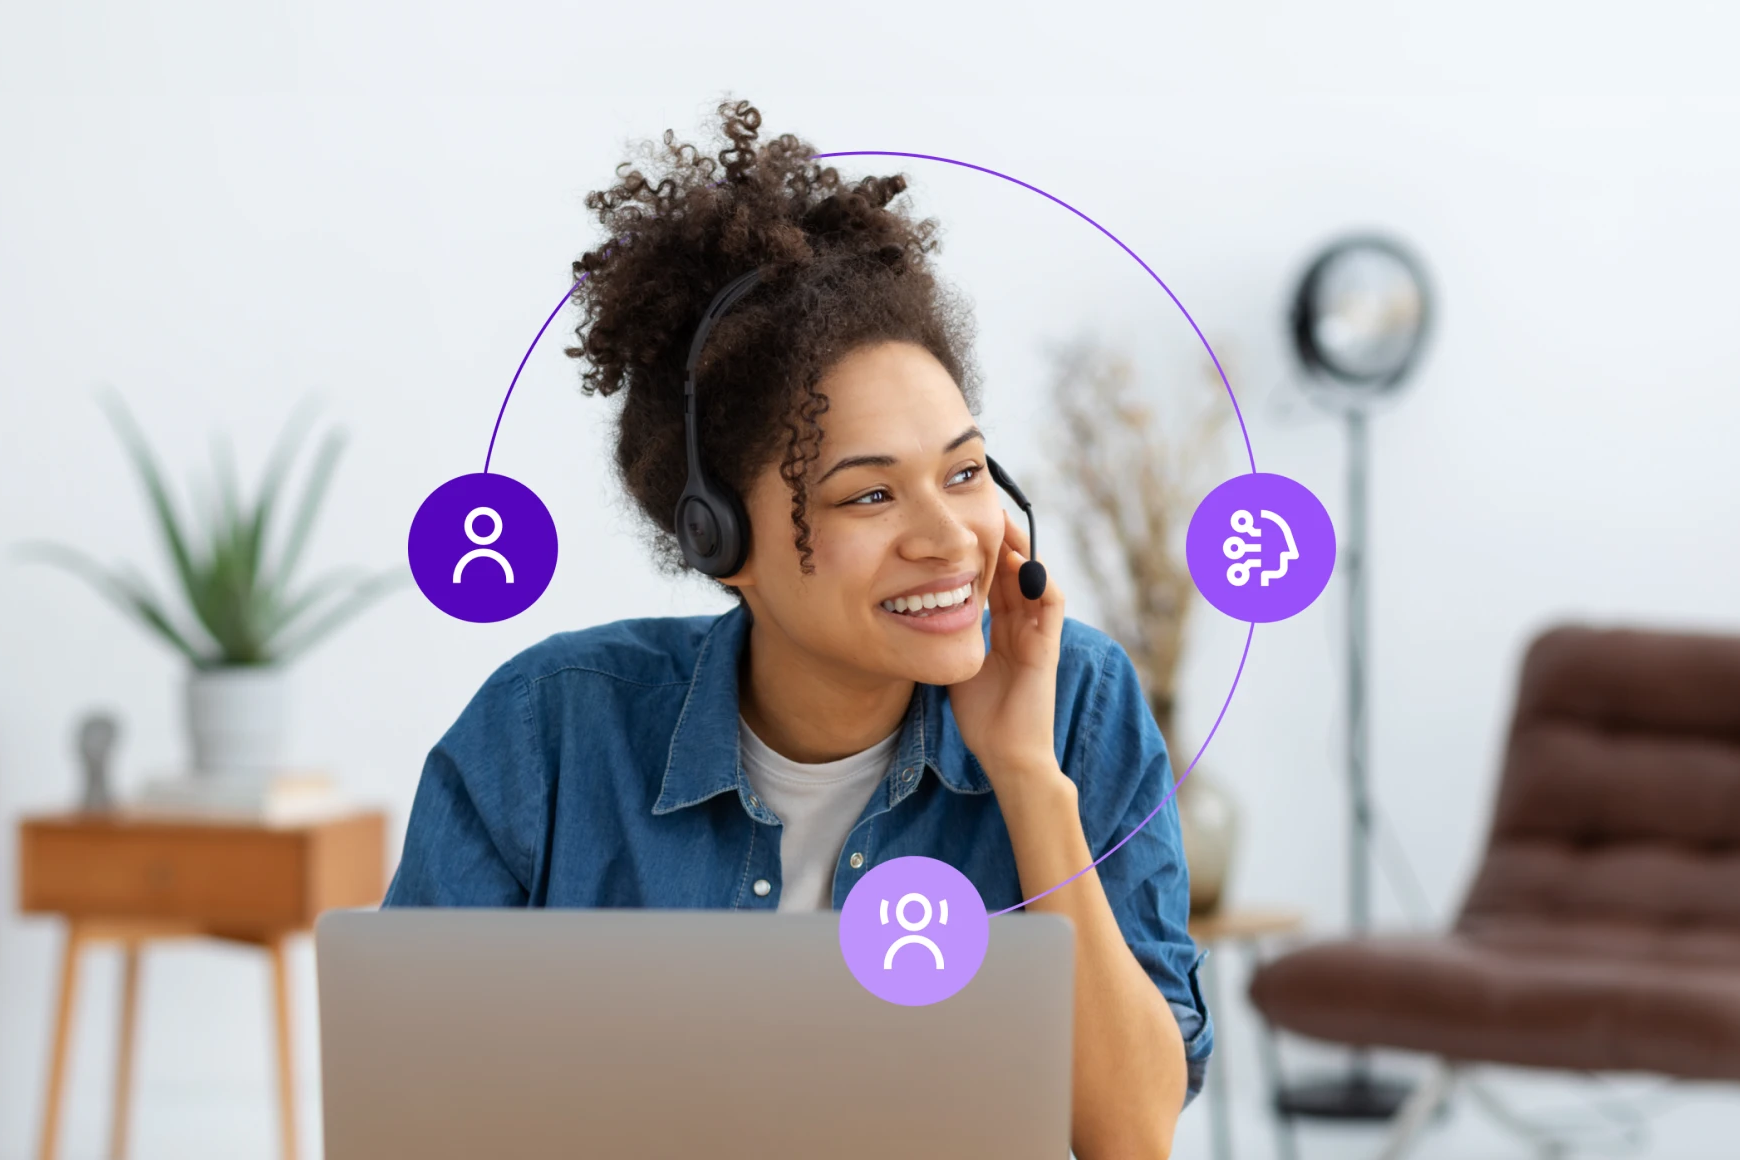 How can AI improve contact center productivity?